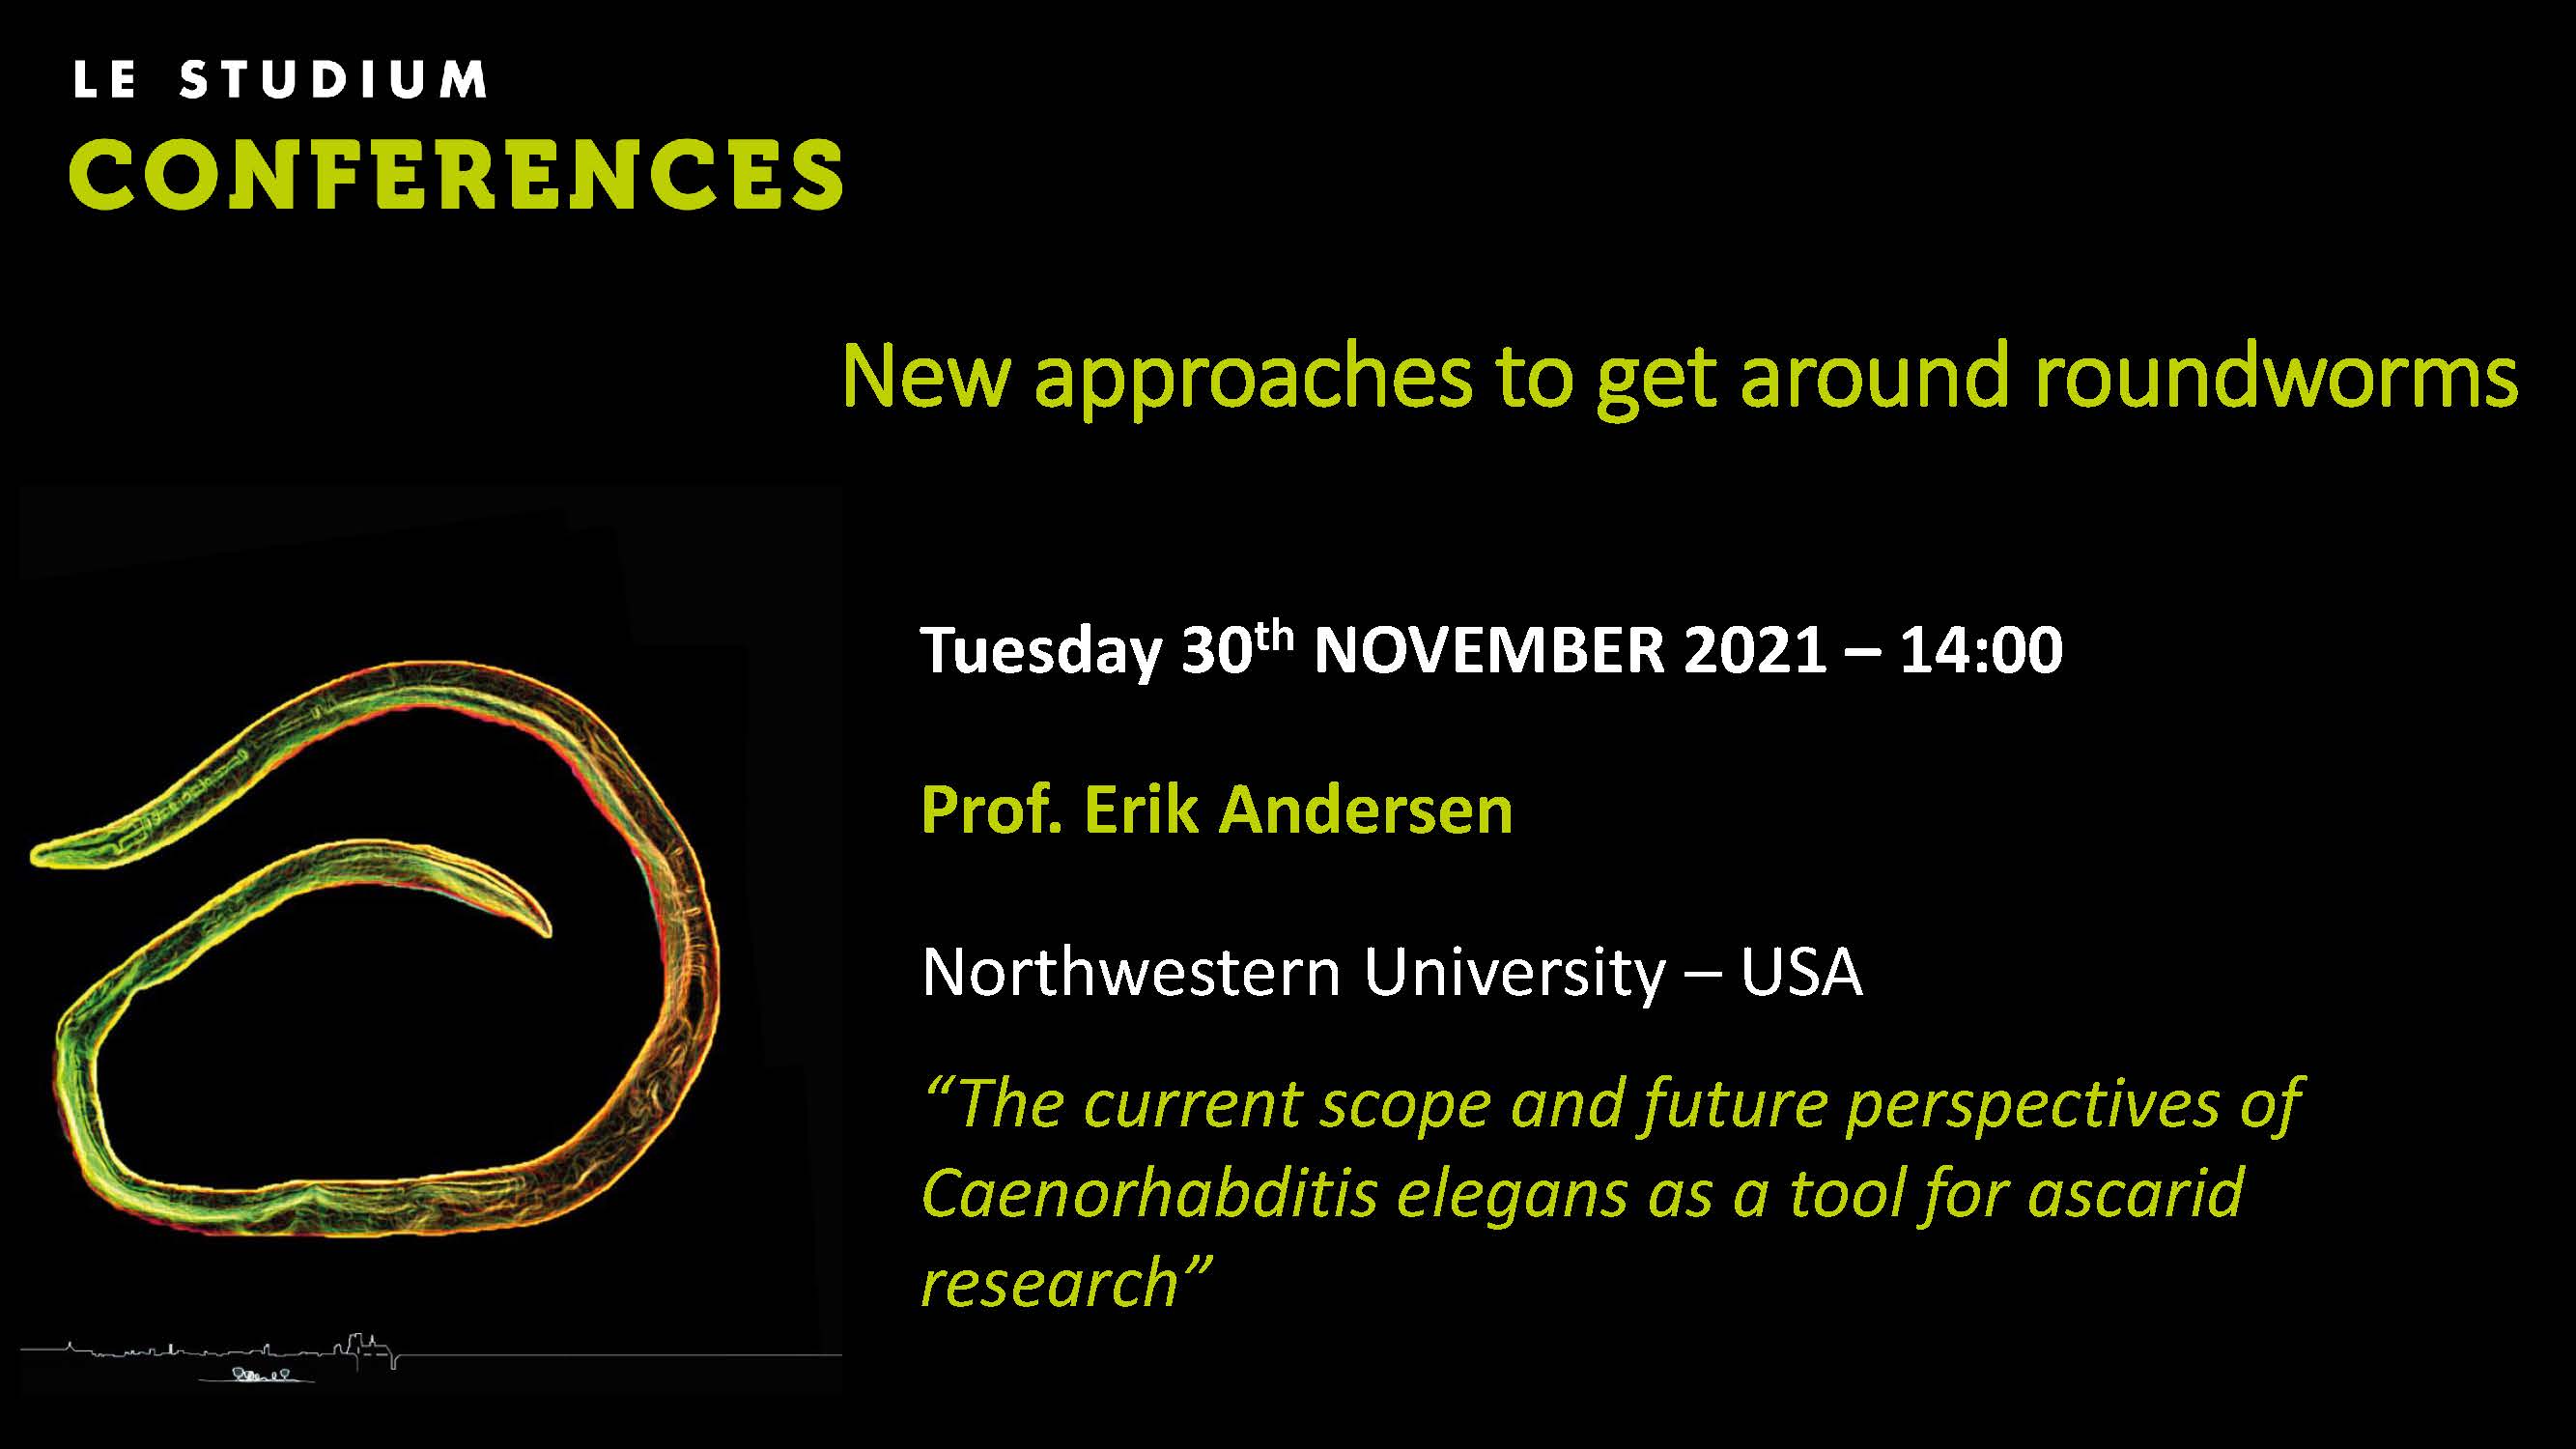 Prof Erik Anderson - The current scope and future perspectives of Caenorhabditis elegans as a tool for ascarid research